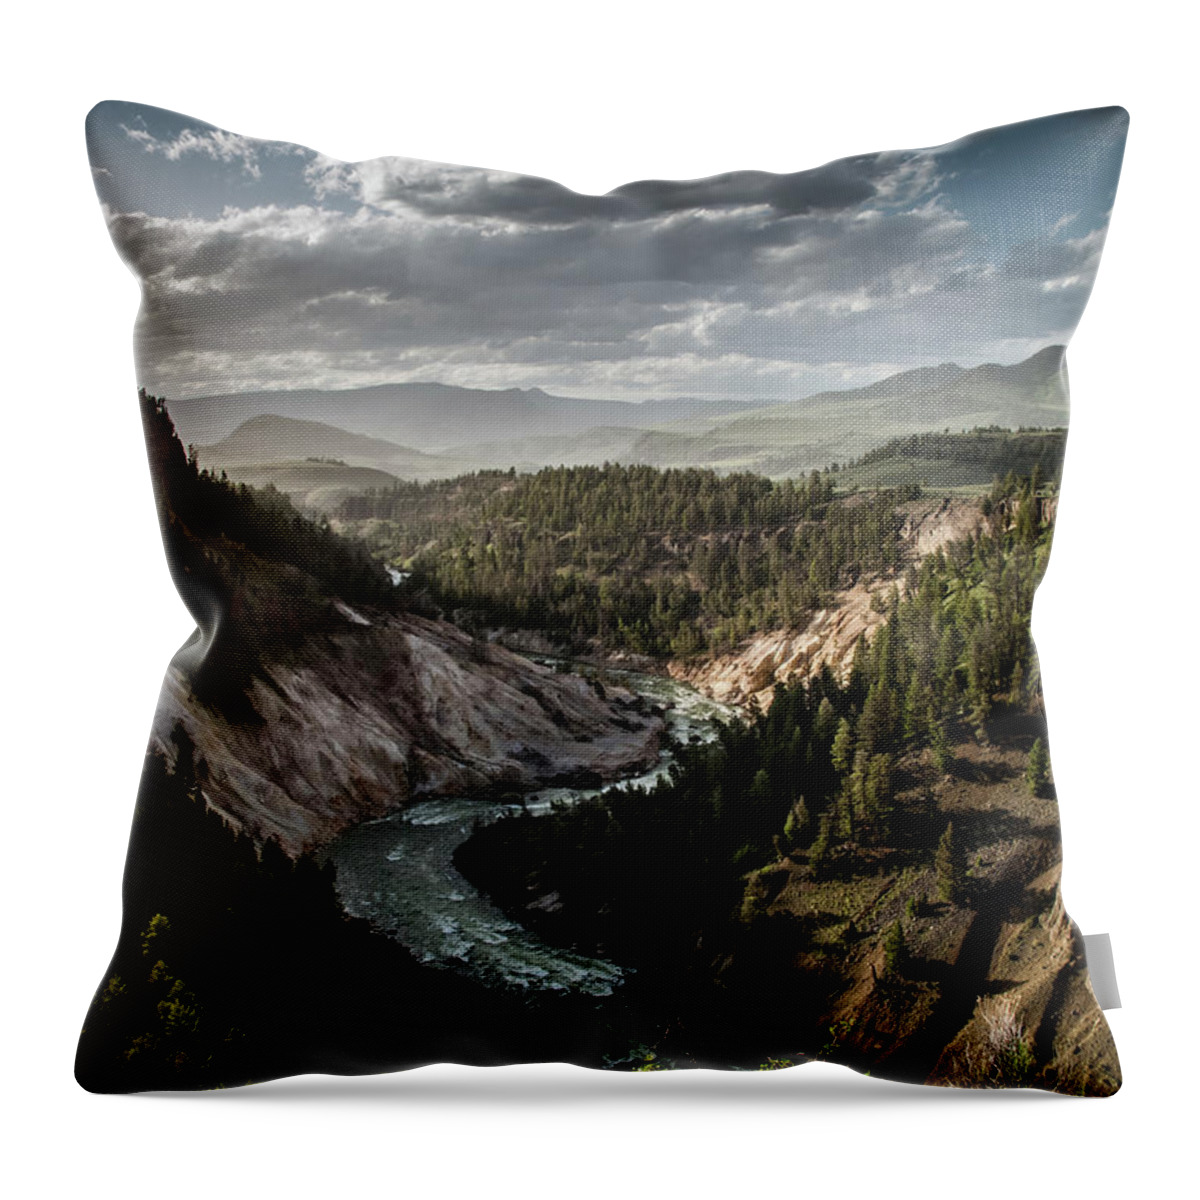 Scenics Throw Pillow featuring the photograph Yellowstone National Park Overlook by Danielle Bednarczyk